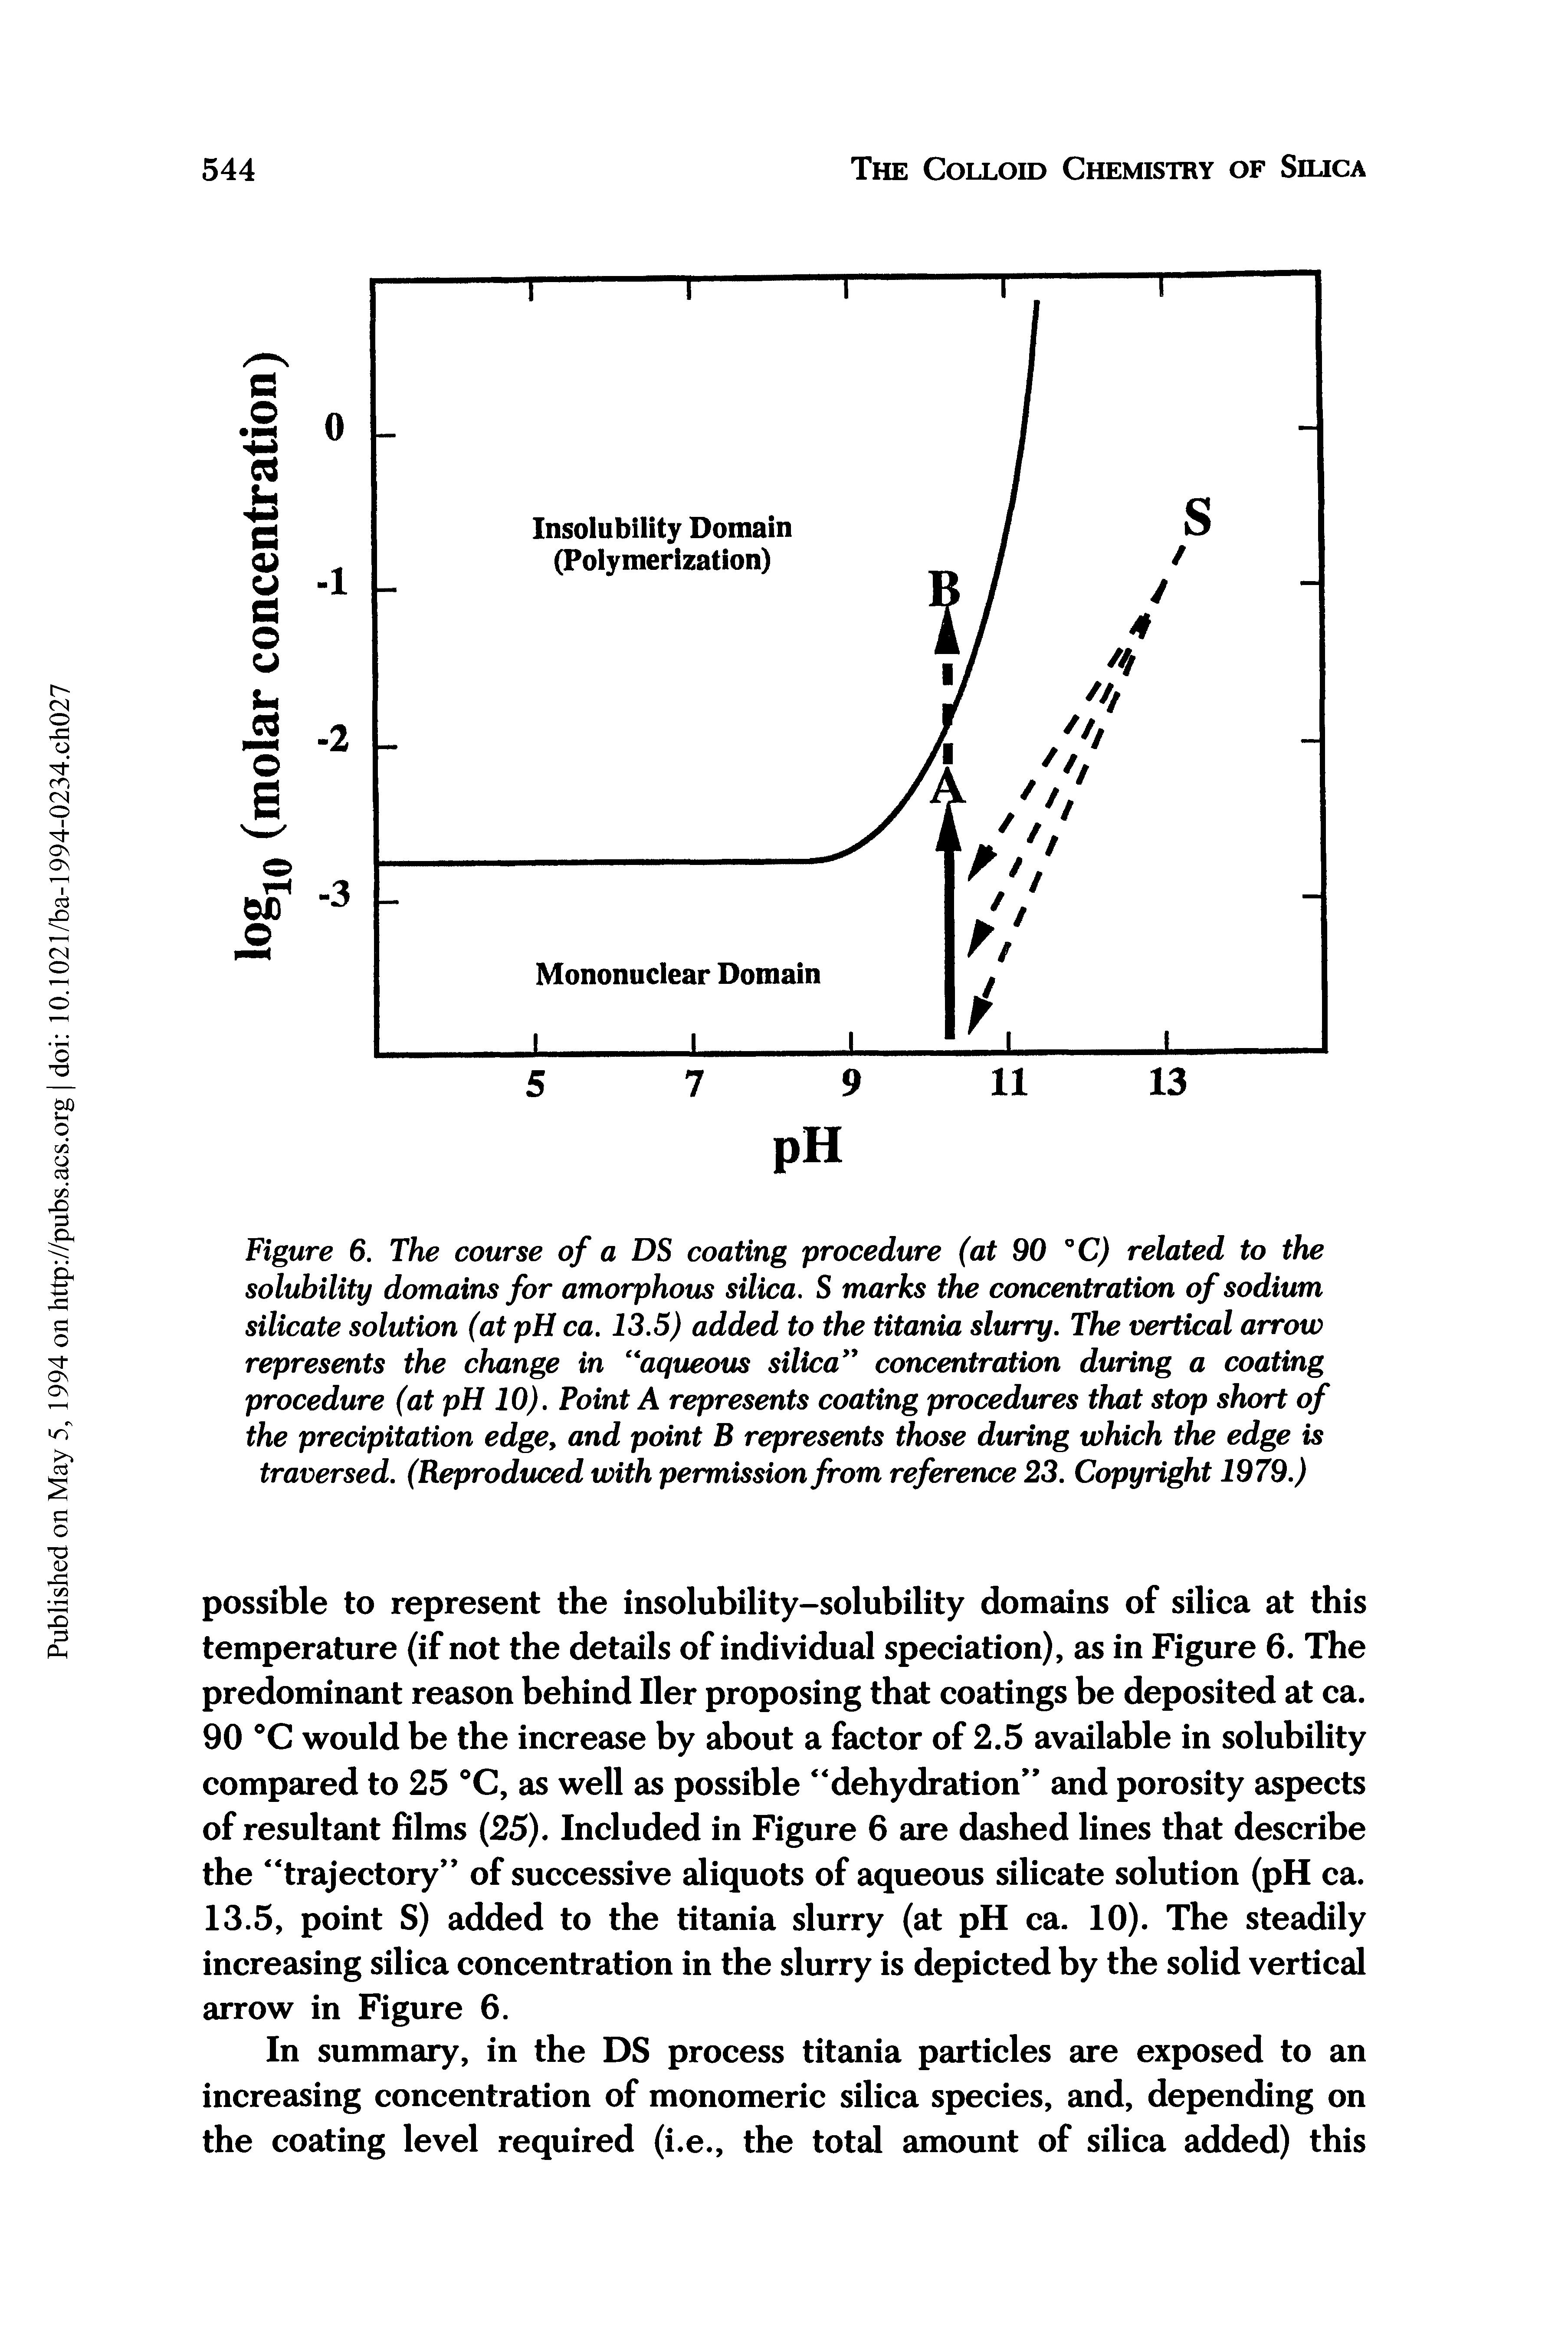 Figure 6. The course of a DS coating procedure (at 90 °C) related to the solubility domains for amorphous silica. S marks the concentration of sodium silicate solution (at pH ca. 13.5) added to the titania slurry. The vertical arrow represents the change in aqueous silica concentration during a coating procedure (at pH 10). Point A represents coating procedures that stop short of the precipitation edge, and point B represents those during which the edge is traversed. (Reproduced with permission from reference 23. Copyright 1979.)...